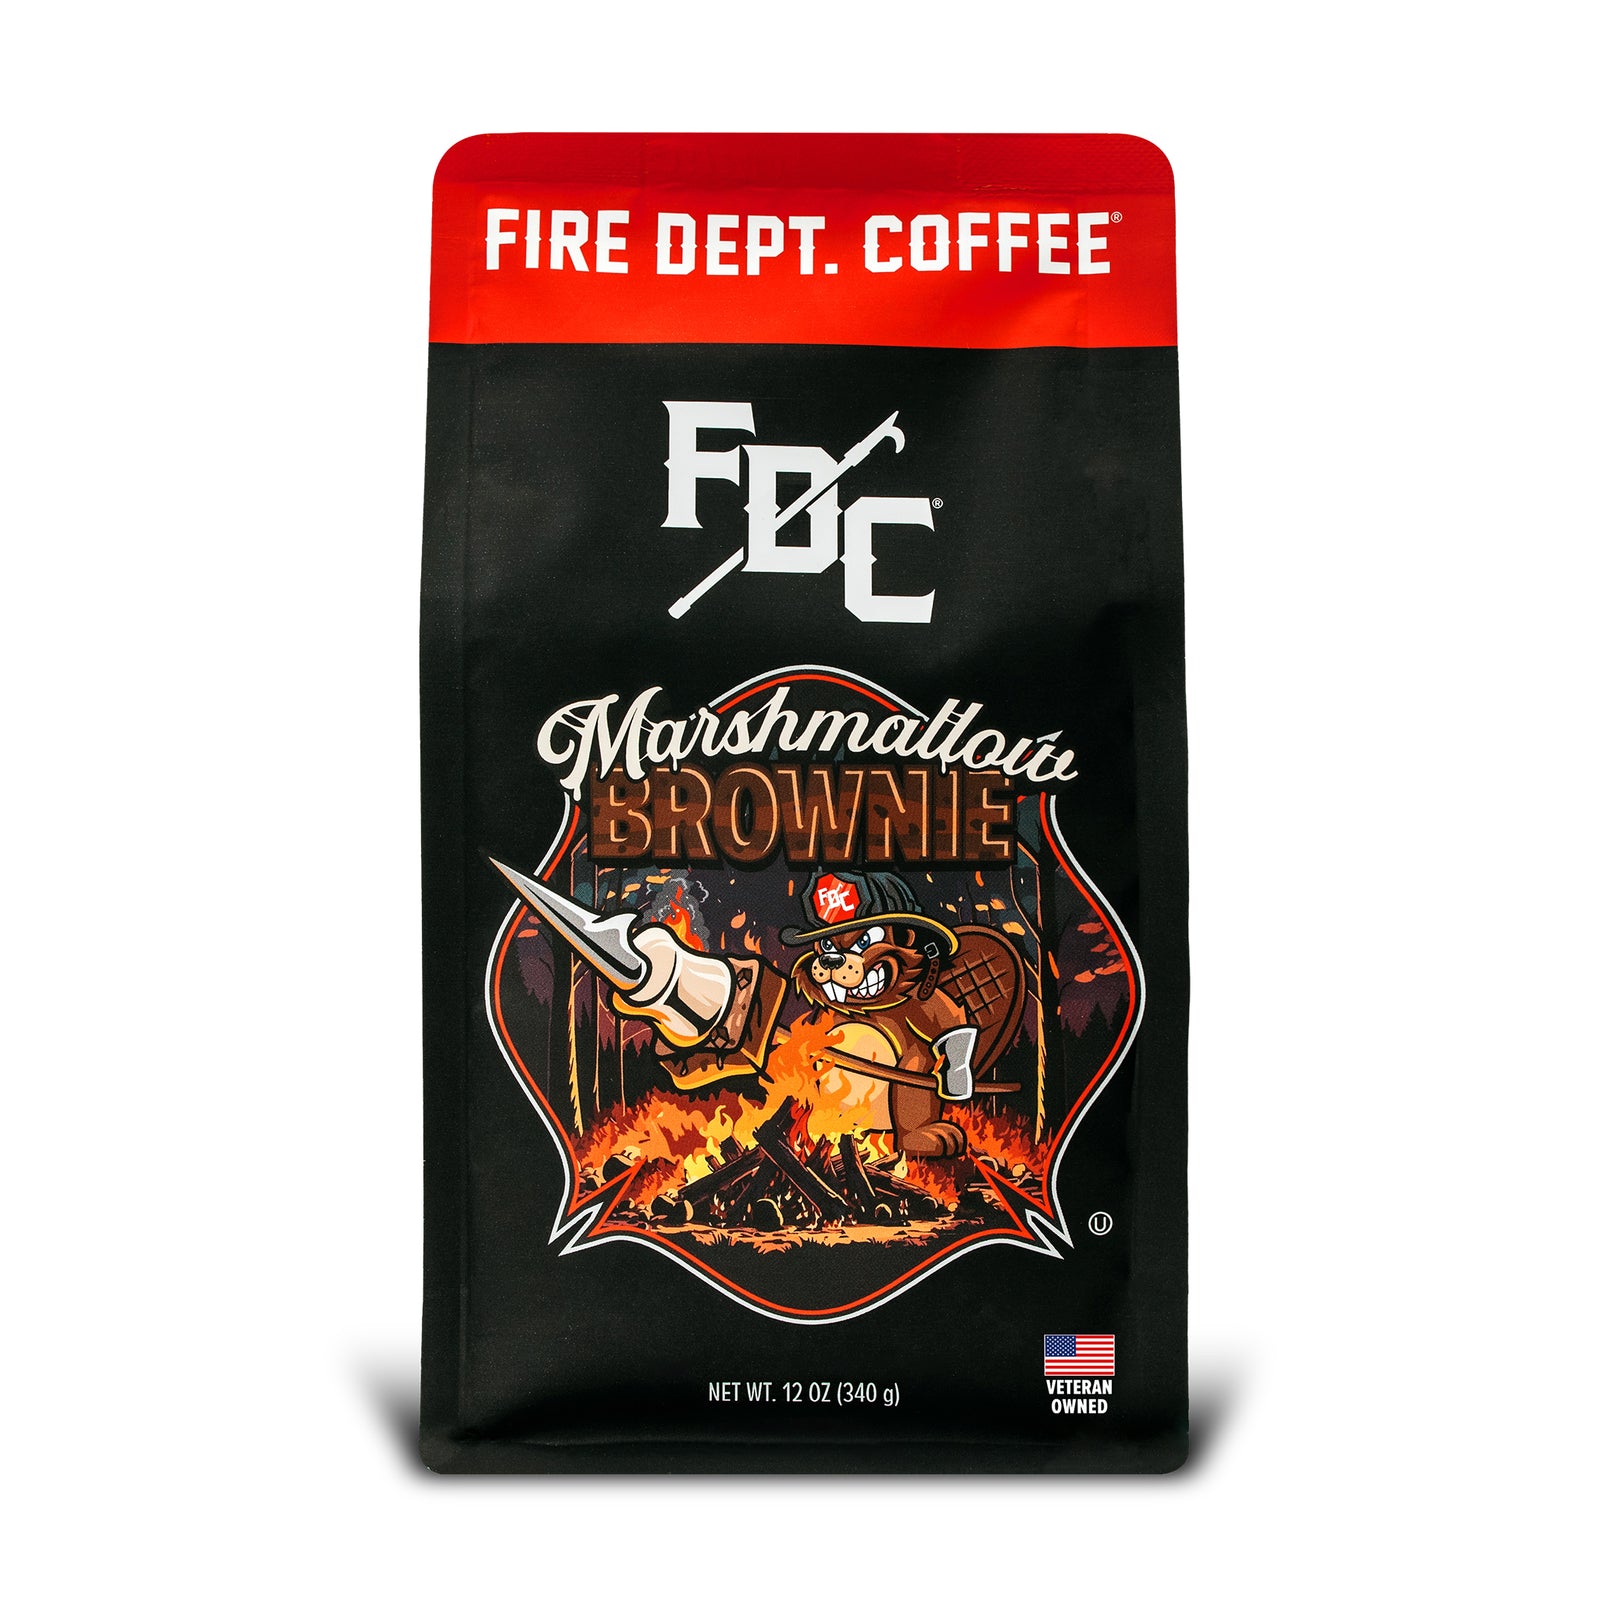 A bag of Fire Department Coffee's 12 oz Marshmallow Brownie Coffee with a red section accross the top that says "Fire Dept. Coffee". The art on the bag features a beaver holding a pike pole with a marshmallow and brownie on it over a campfire. The title reads, "Marshmallow Brownie" and there is a veteran owned badge with an American flag in the bottom right corner.